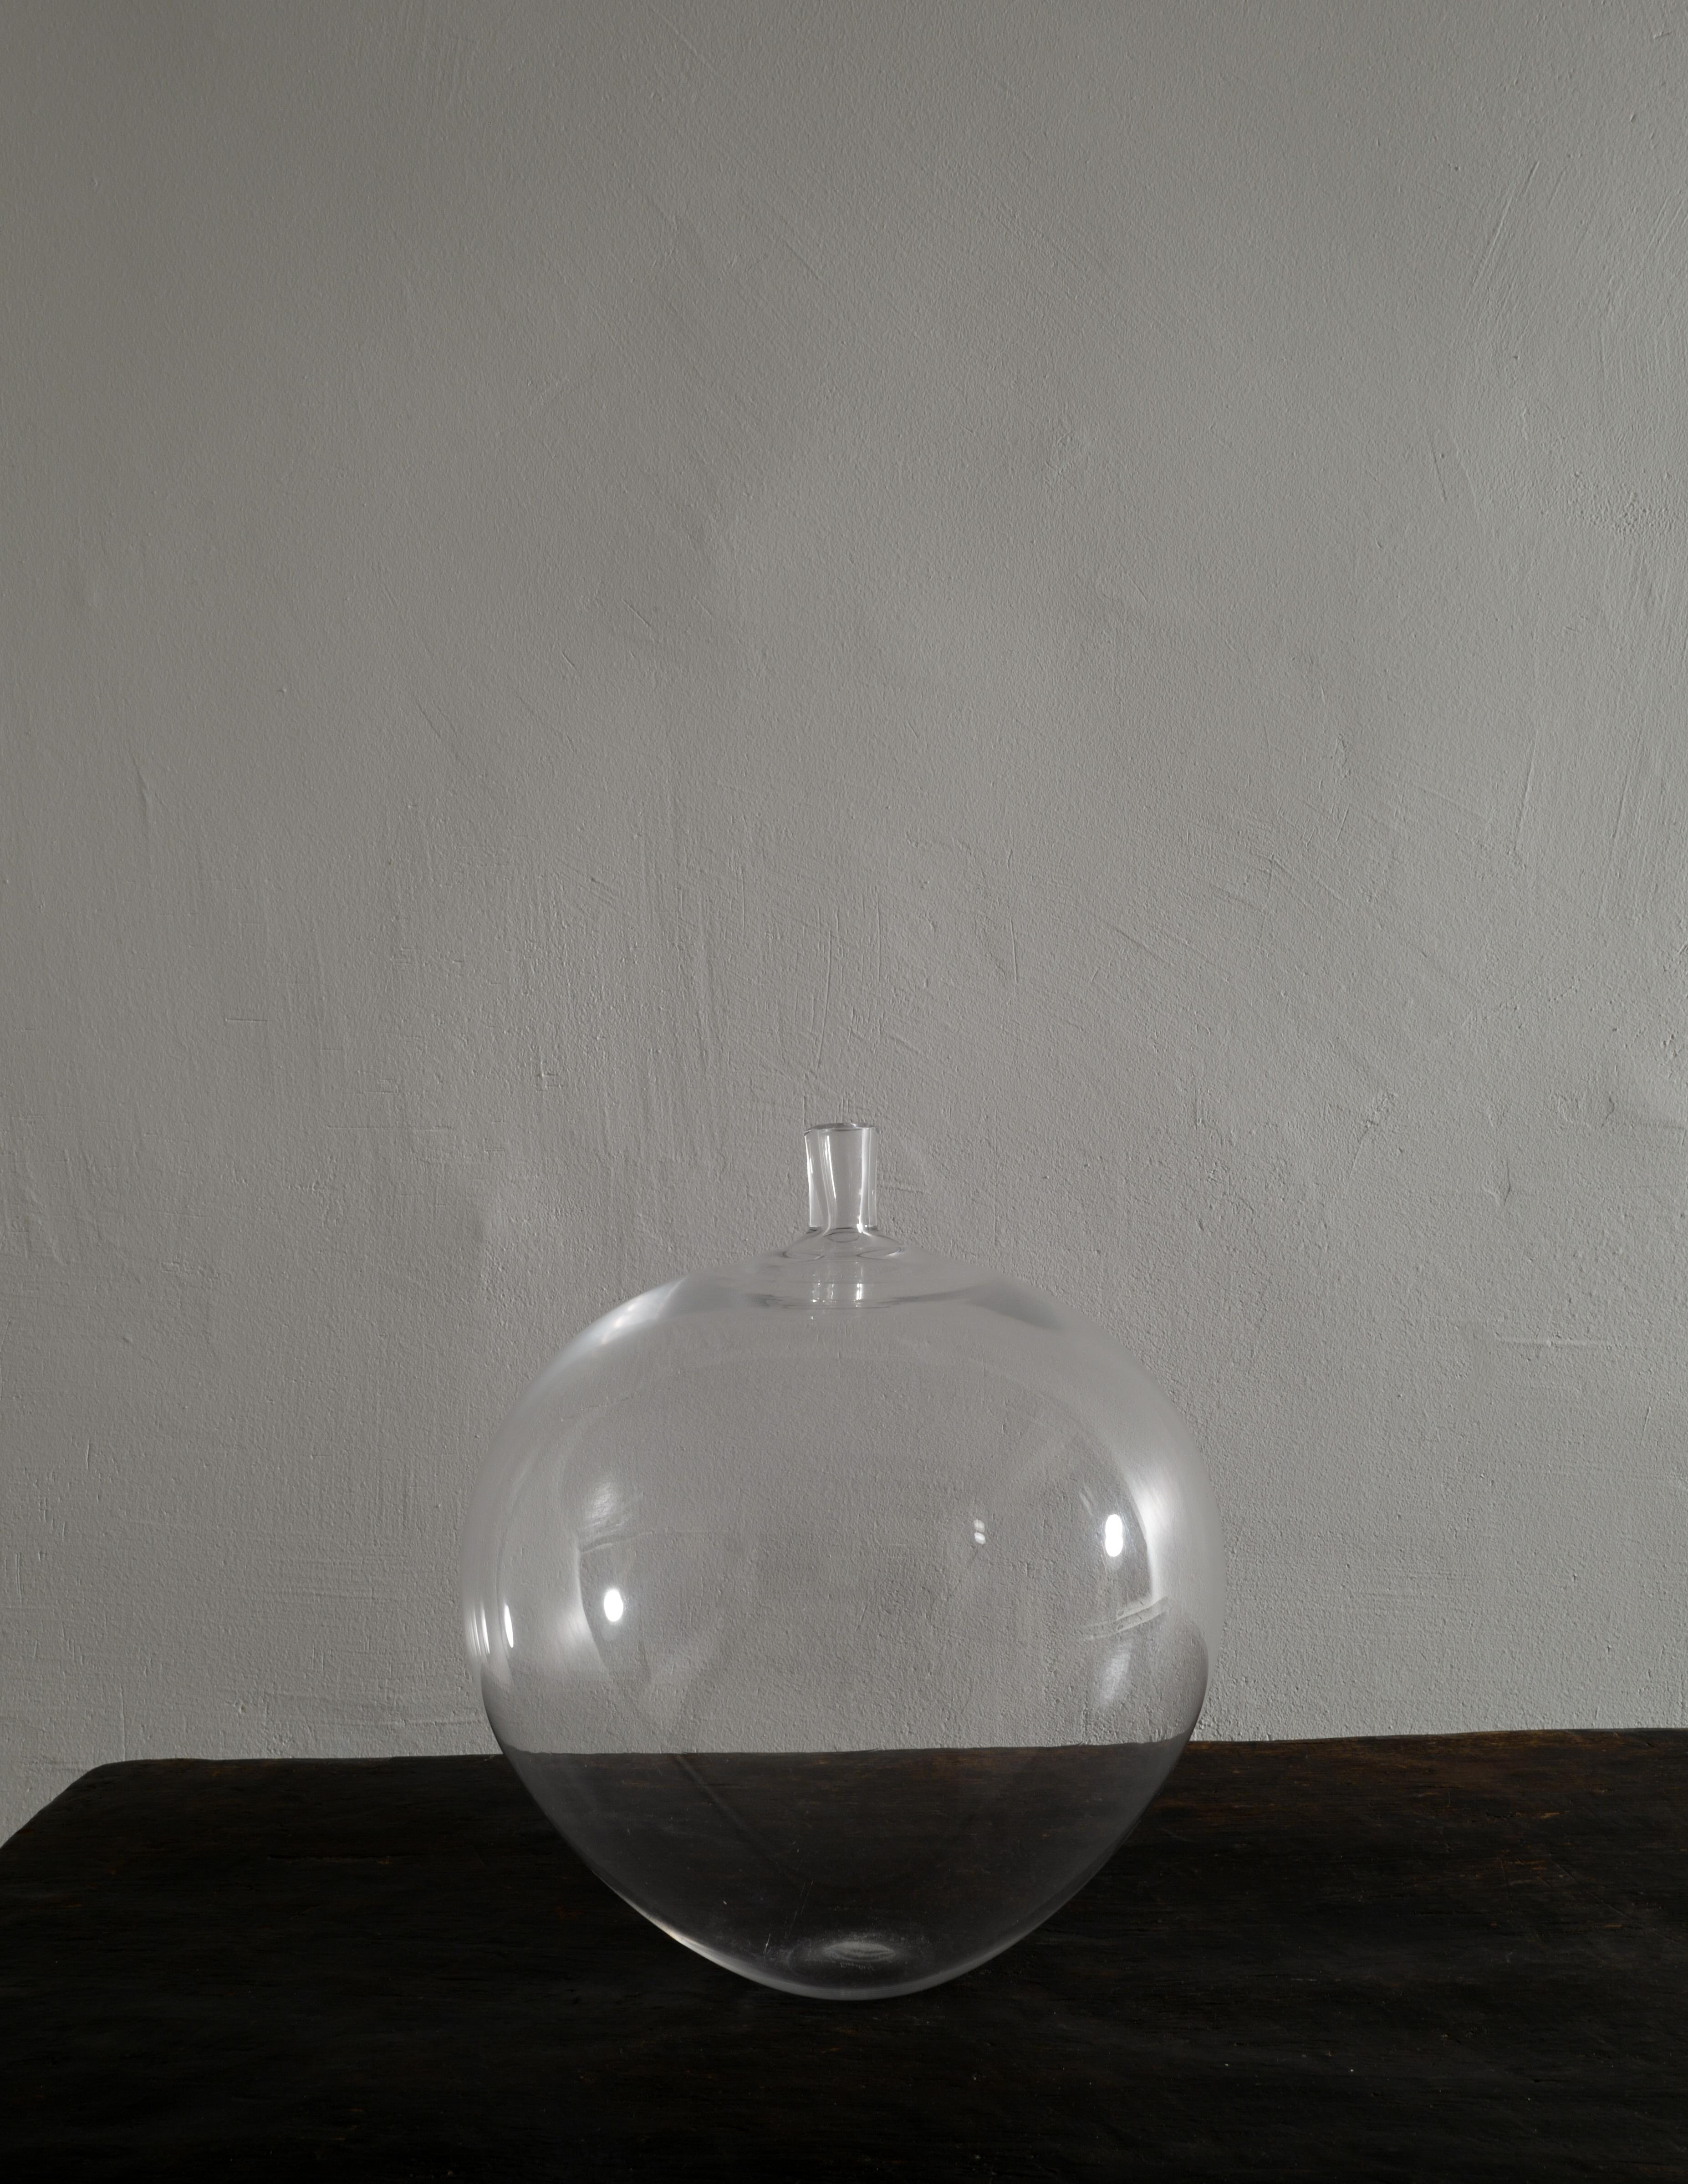 Rare glass vase / sculpture designed by Ingeborg Lundin and produced by Orrefors in Sweden. In good vintage and original condition with small signs from age and use. Signed. 

Dimensions: H: 39 cm Diameter: 33 cm 